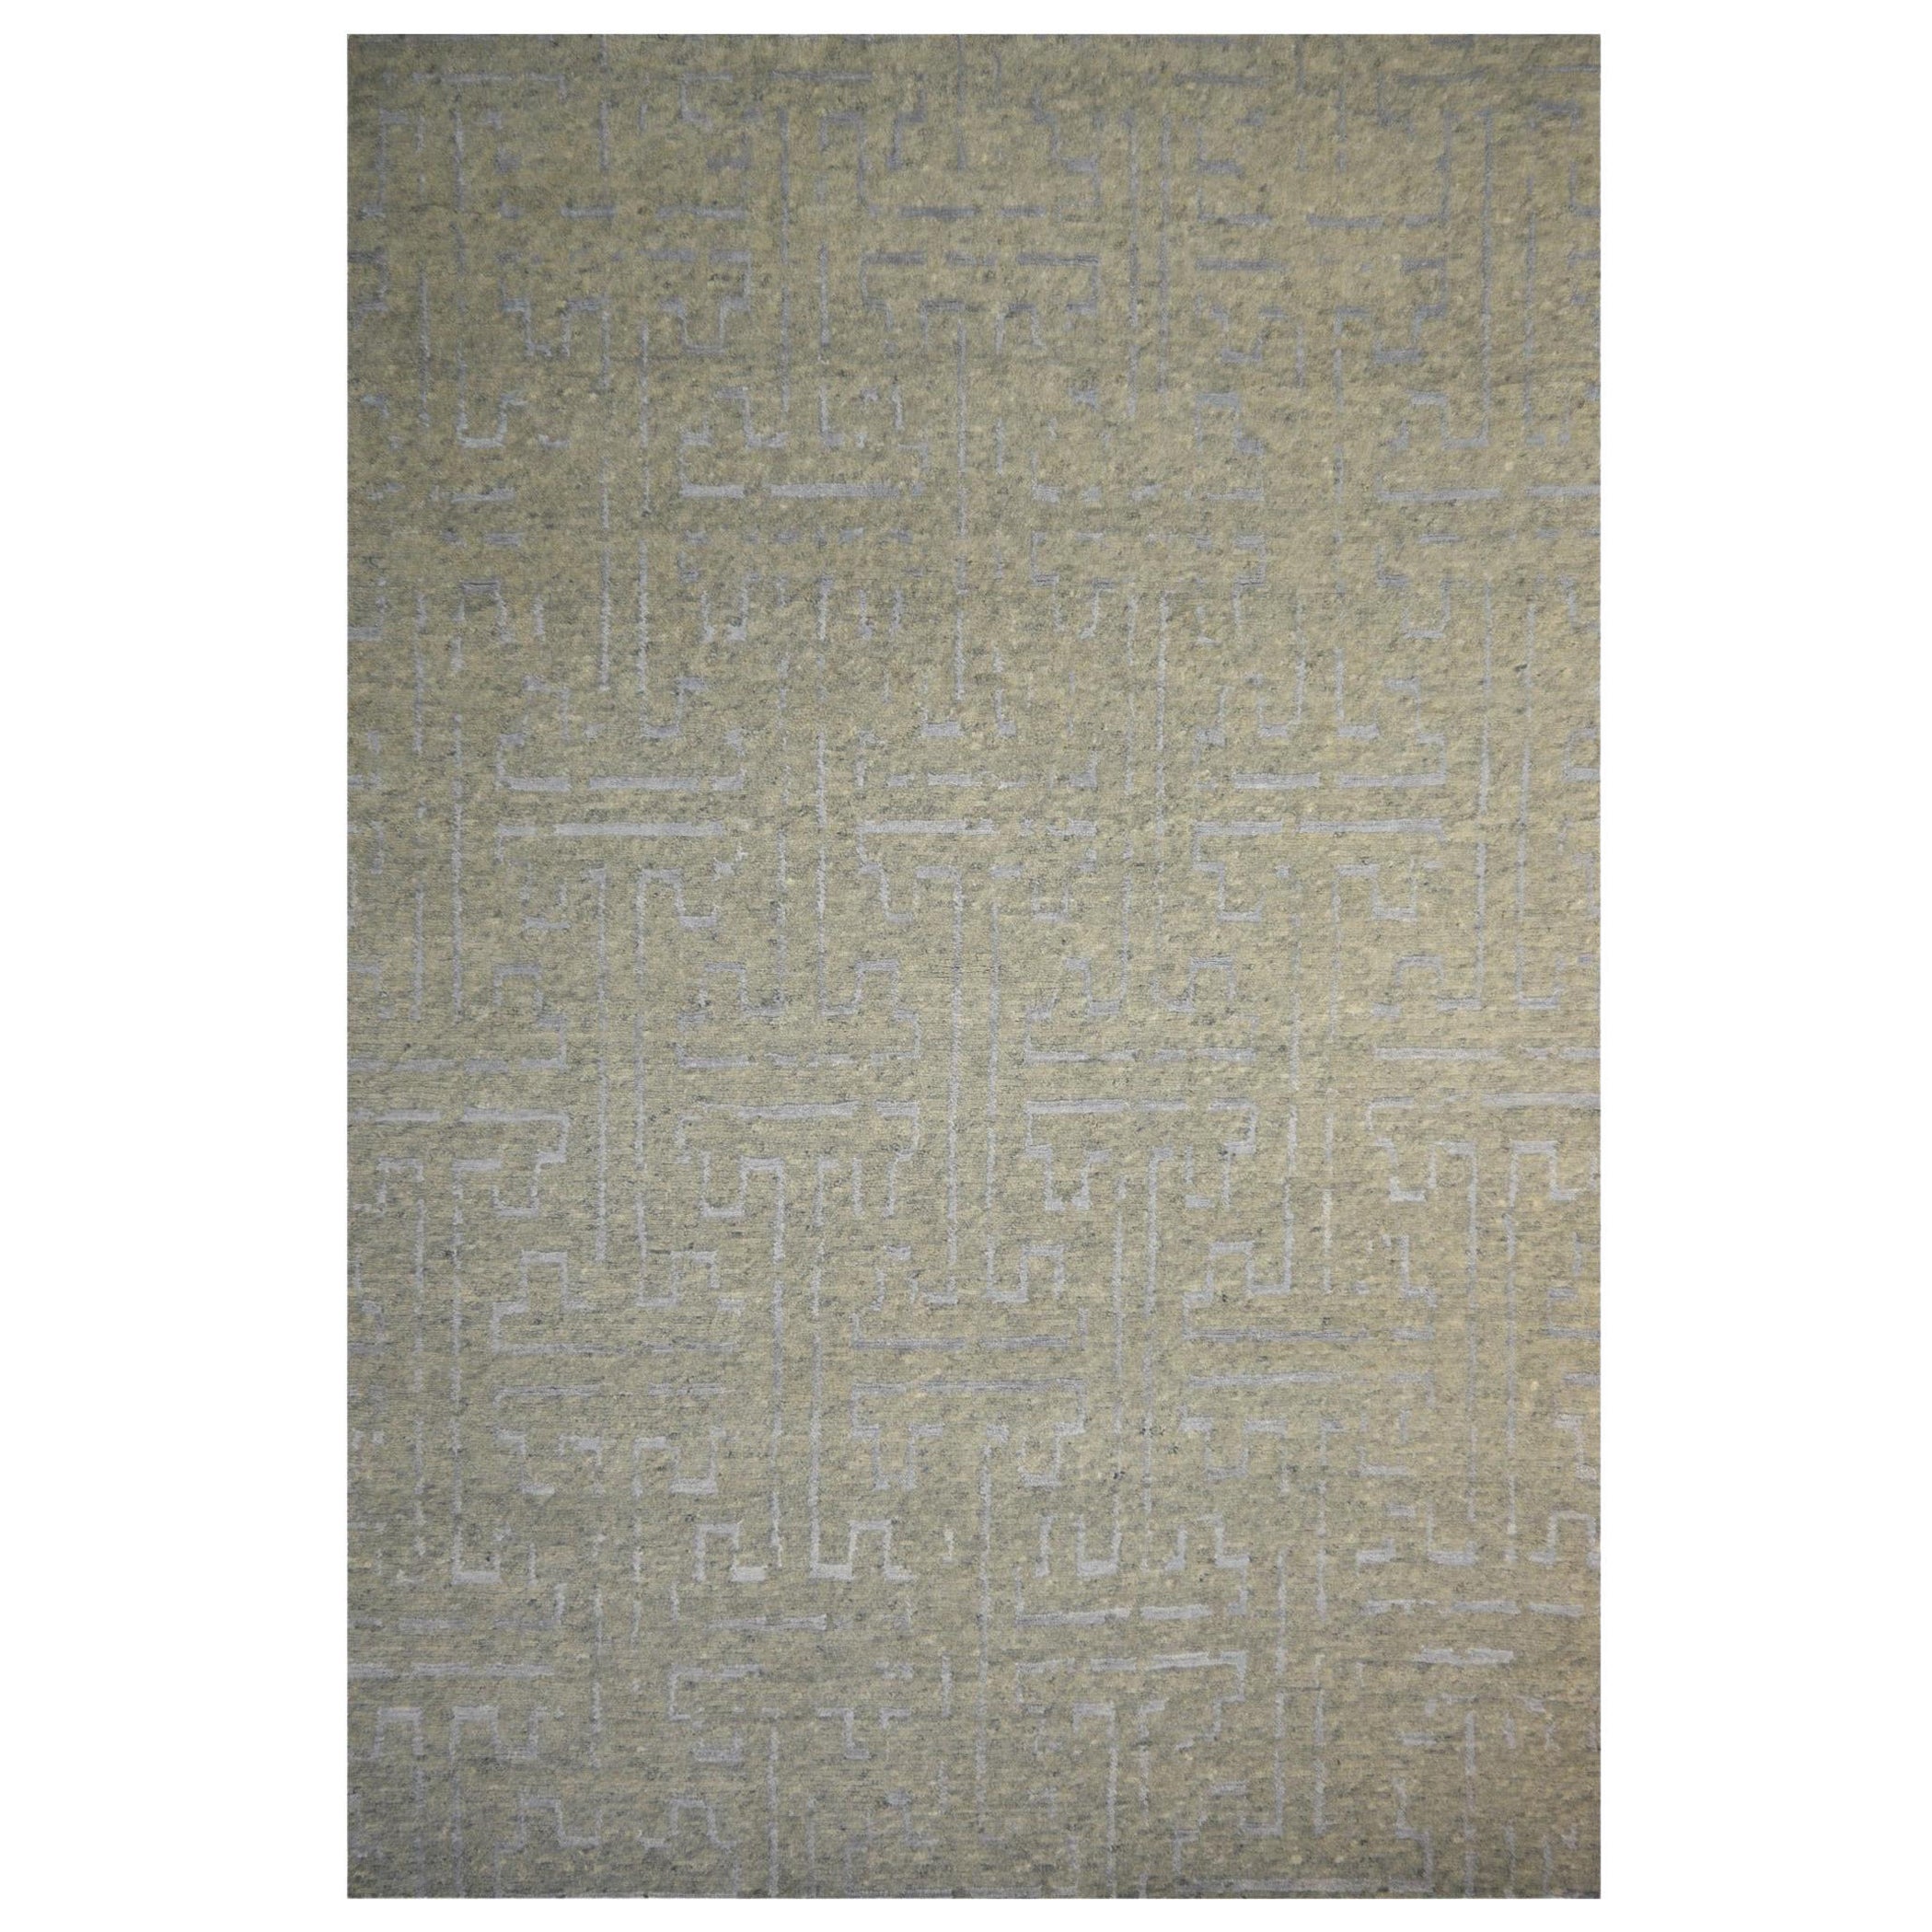 Contemporary Art Deco Design Rug Hand Knotted Wool and Silk Djoharian Collection